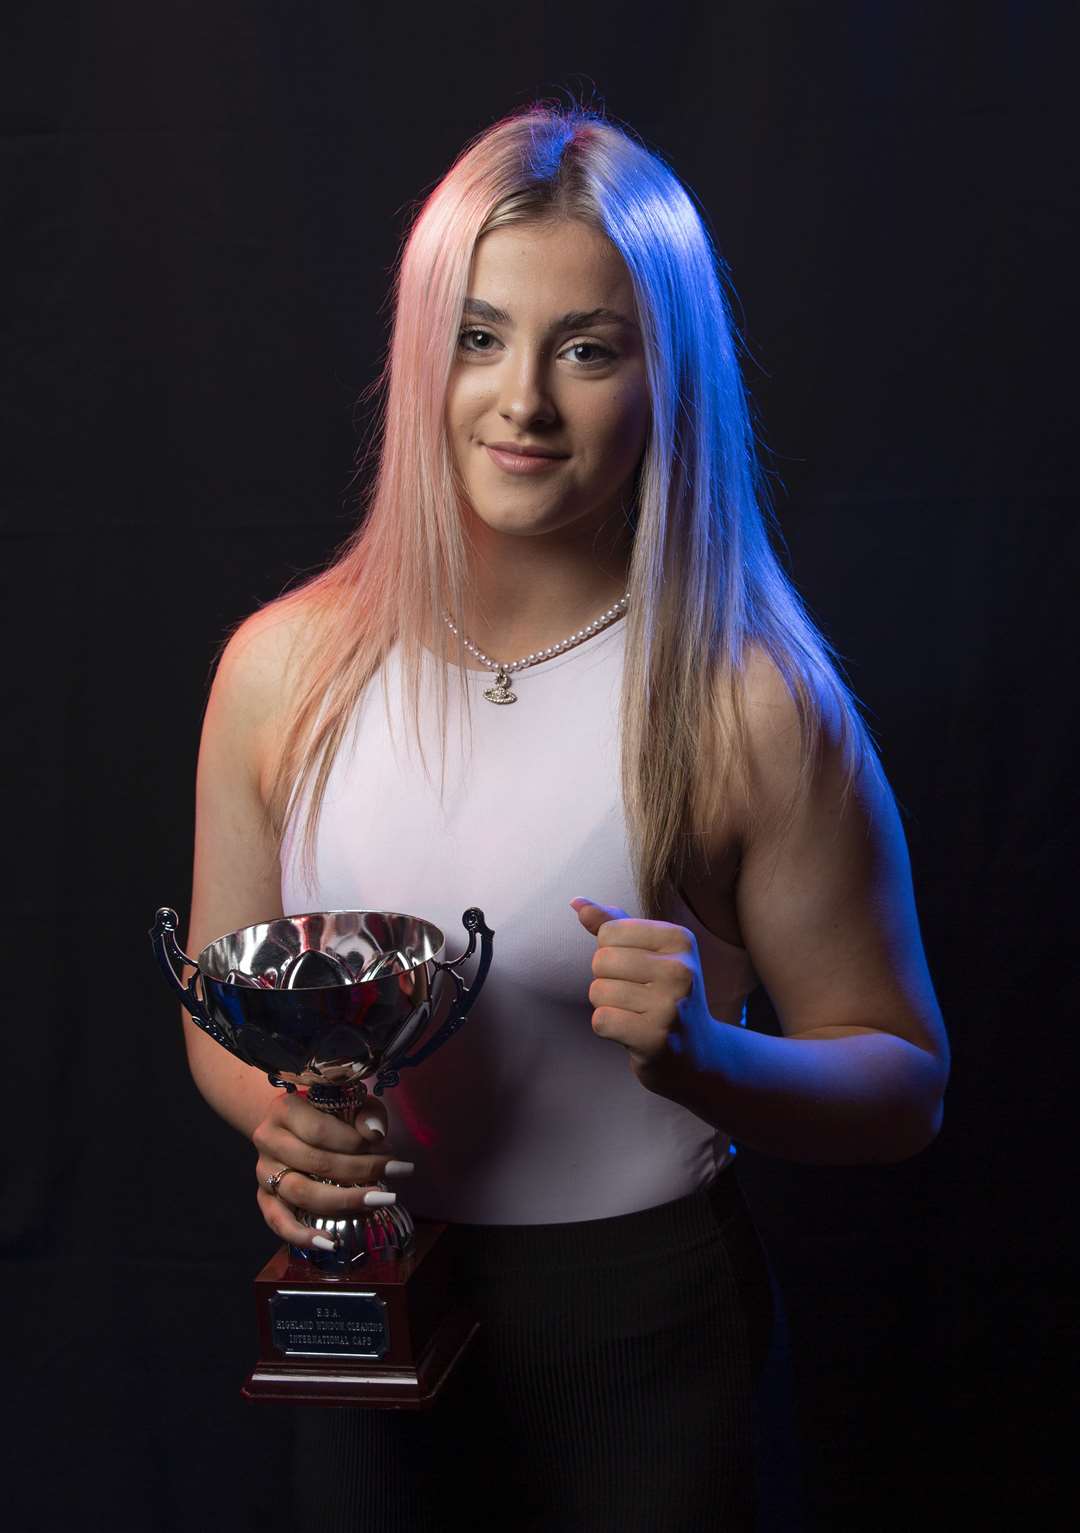 Sarai Grant earned Highland Boxing Academy's ambassador award in recognition of her achievements in the sport at HBA's 2021/22 awards night. Picture: David Rothnie